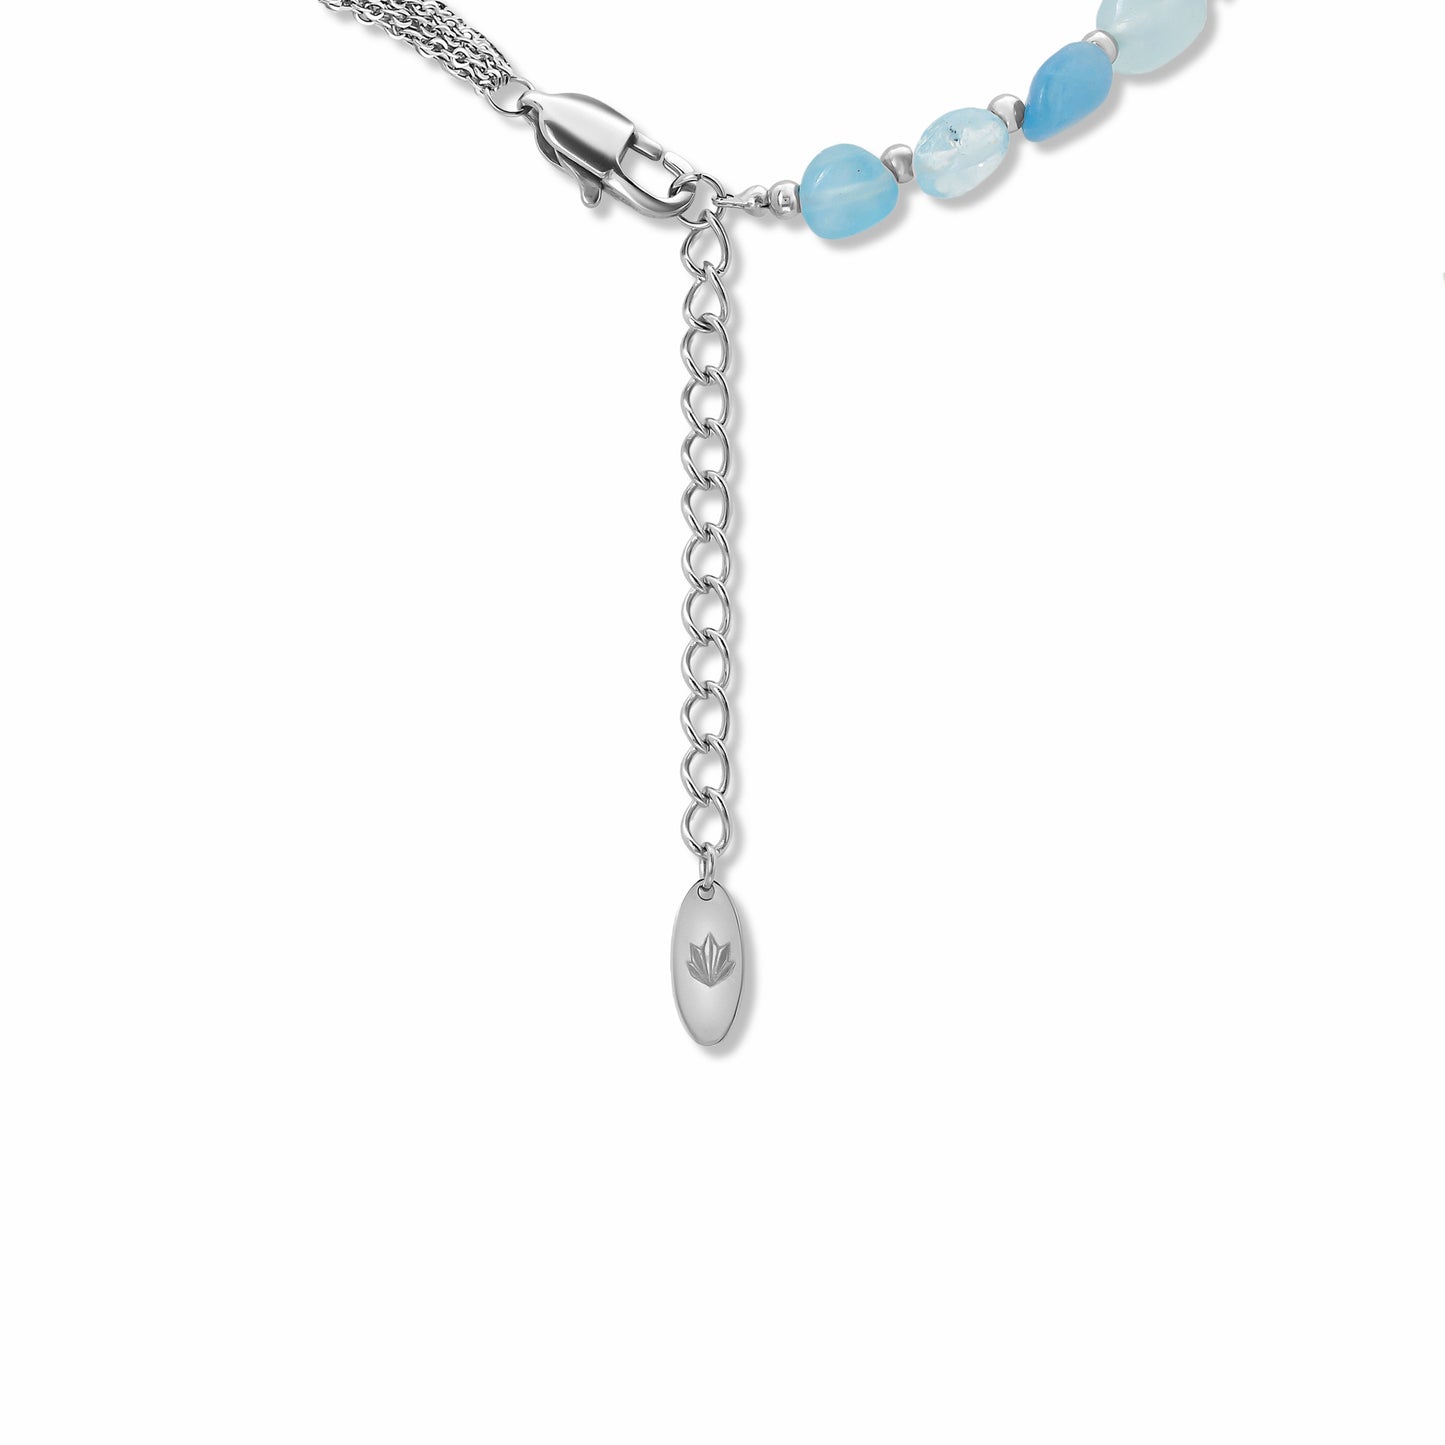 Aquamarine Stone & Pearl Beaded Necklace clasp with extender and Crysttal logo tag